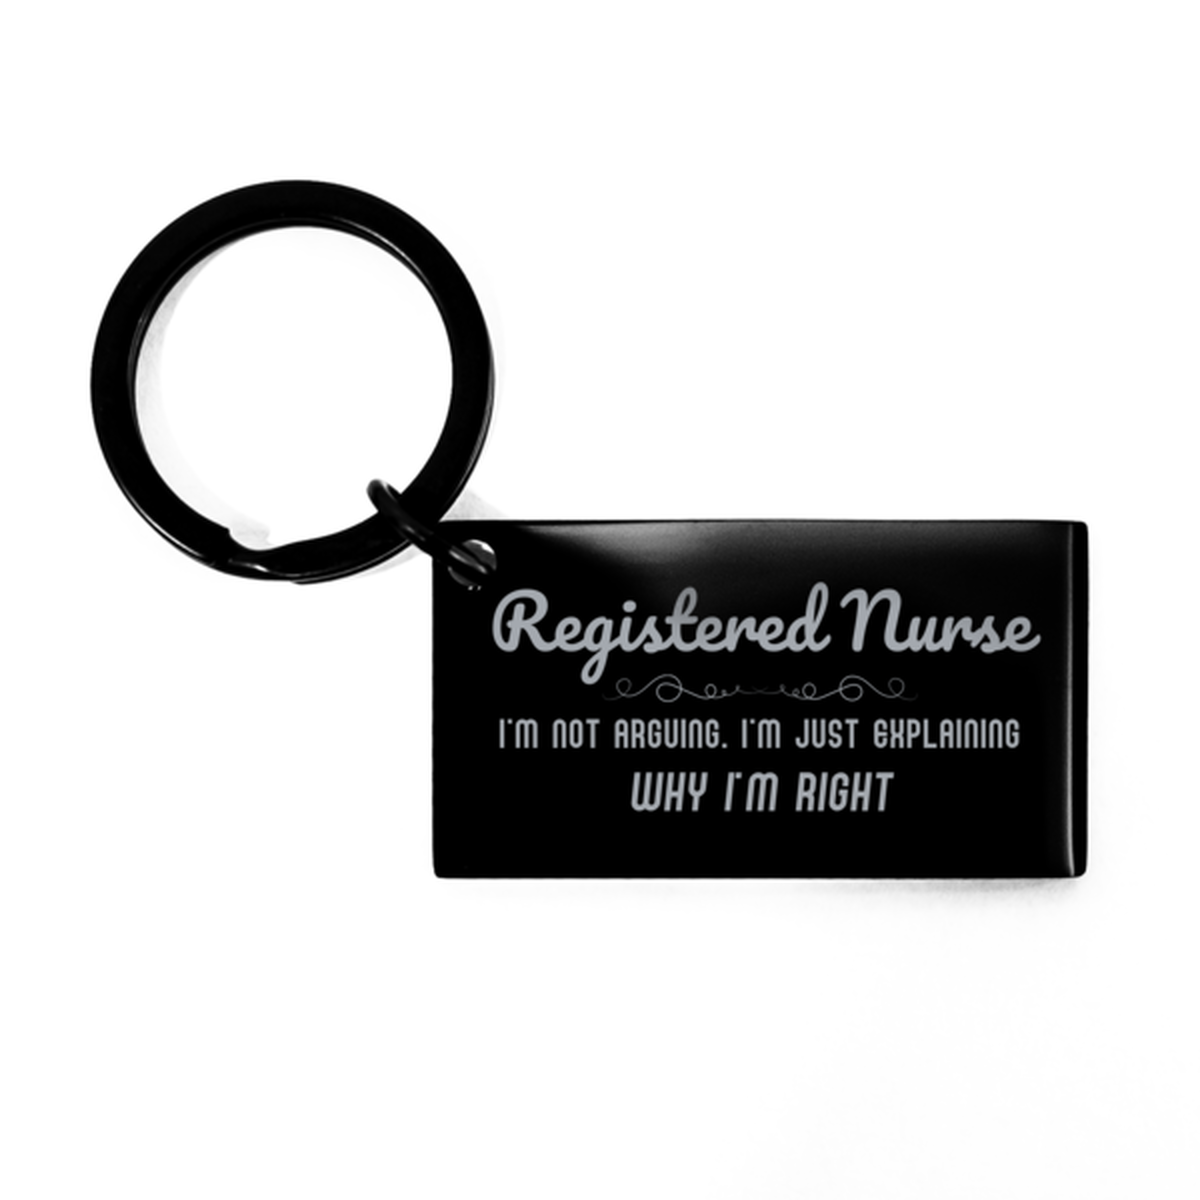 Registered Nurse I'm not Arguing. I'm Just Explaining Why I'm RIGHT Keychain, Funny Saying Quote Registered Nurse Gifts For Registered Nurse Graduation Birthday Christmas Gifts for Men Women Coworker